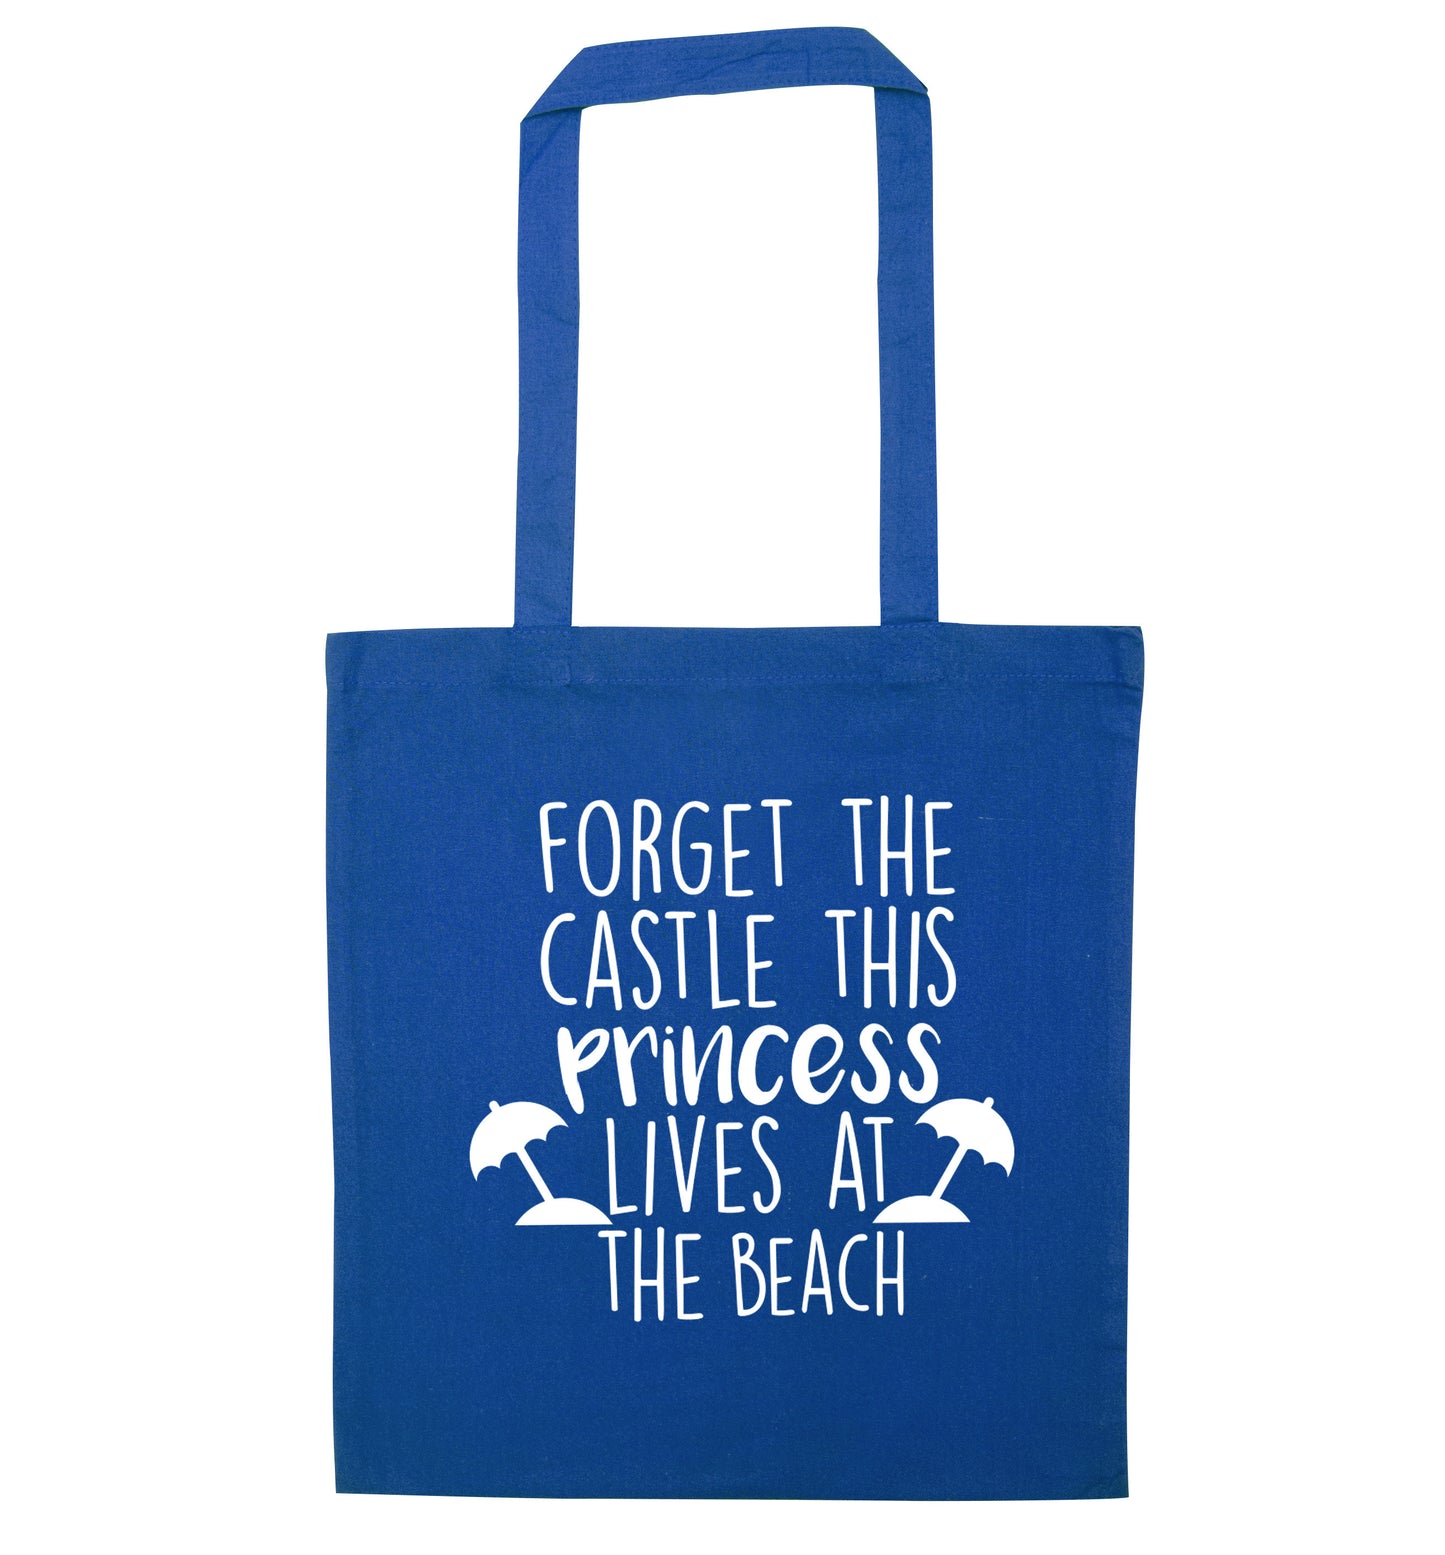 Forget the castle this princess lives at the beach blue tote bag